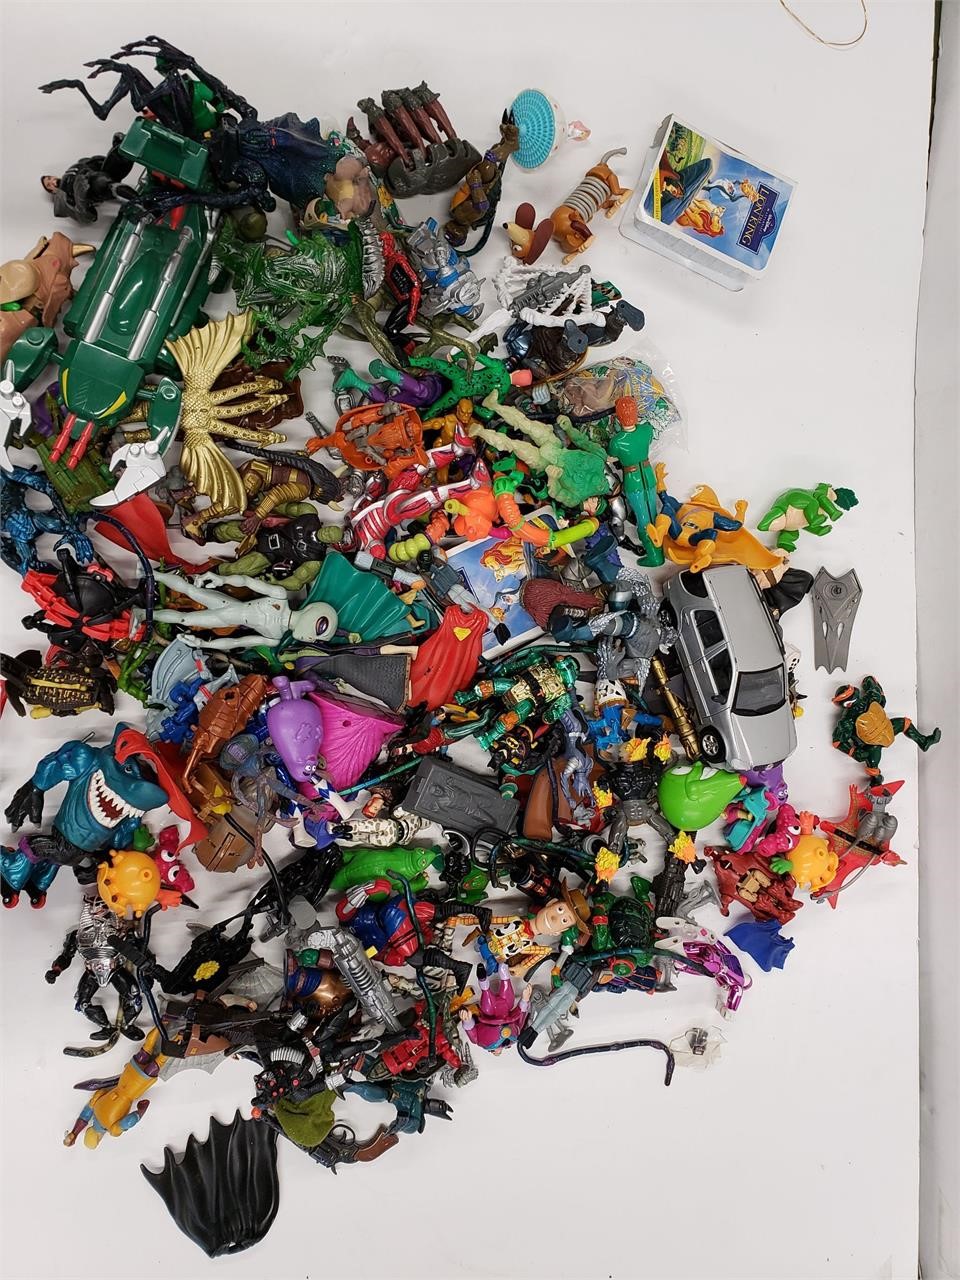 Mystery Box Of Vintage Toys and Action Figures